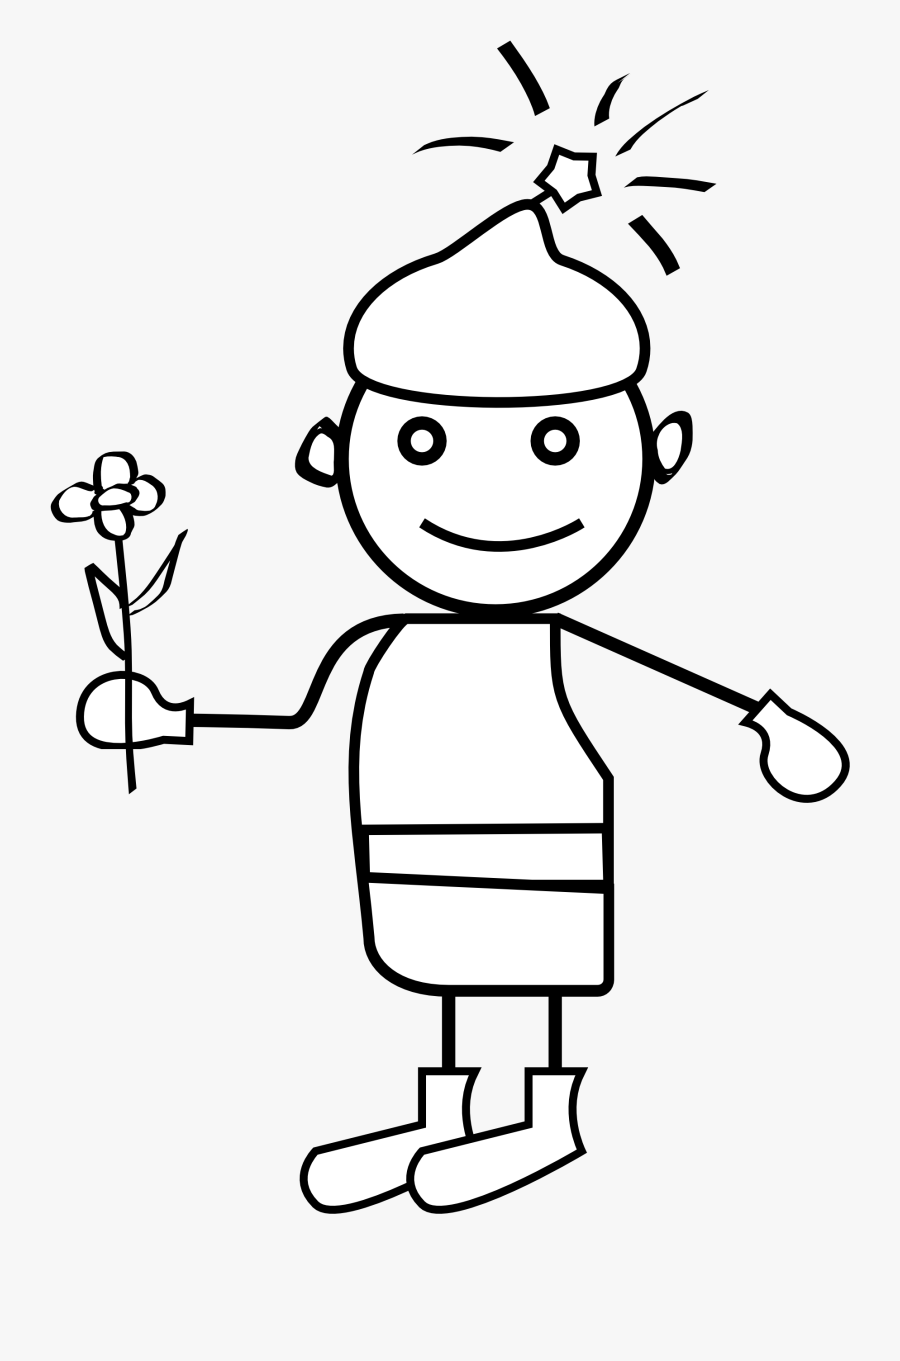 Black And White Boy Png, Transparent Clipart